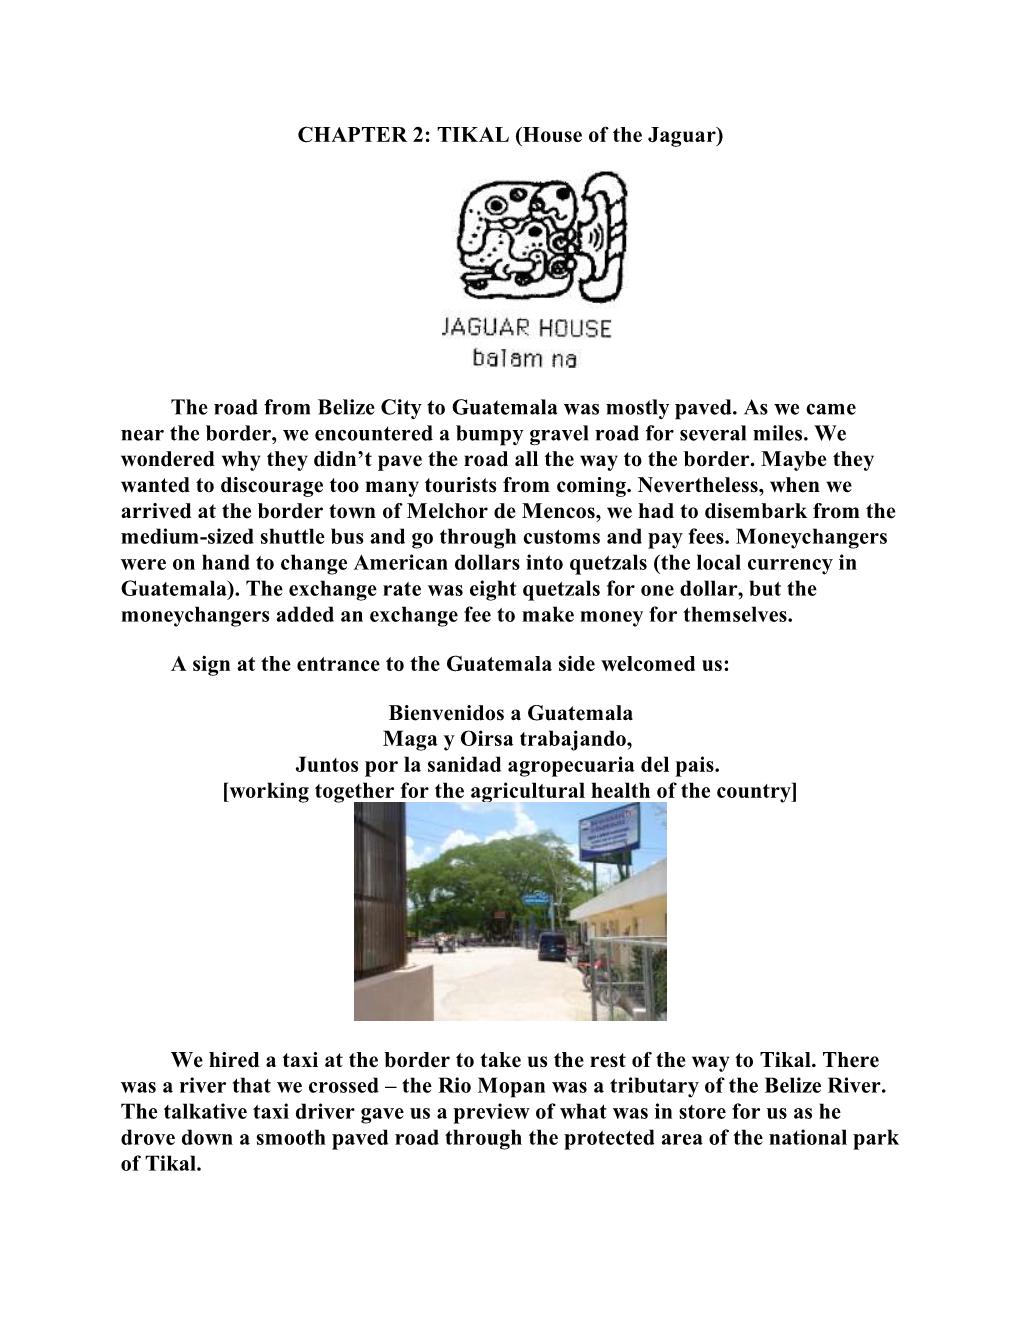 CHAPTER 2: TIKAL (House of the Jaguar) the Road from Belize City To